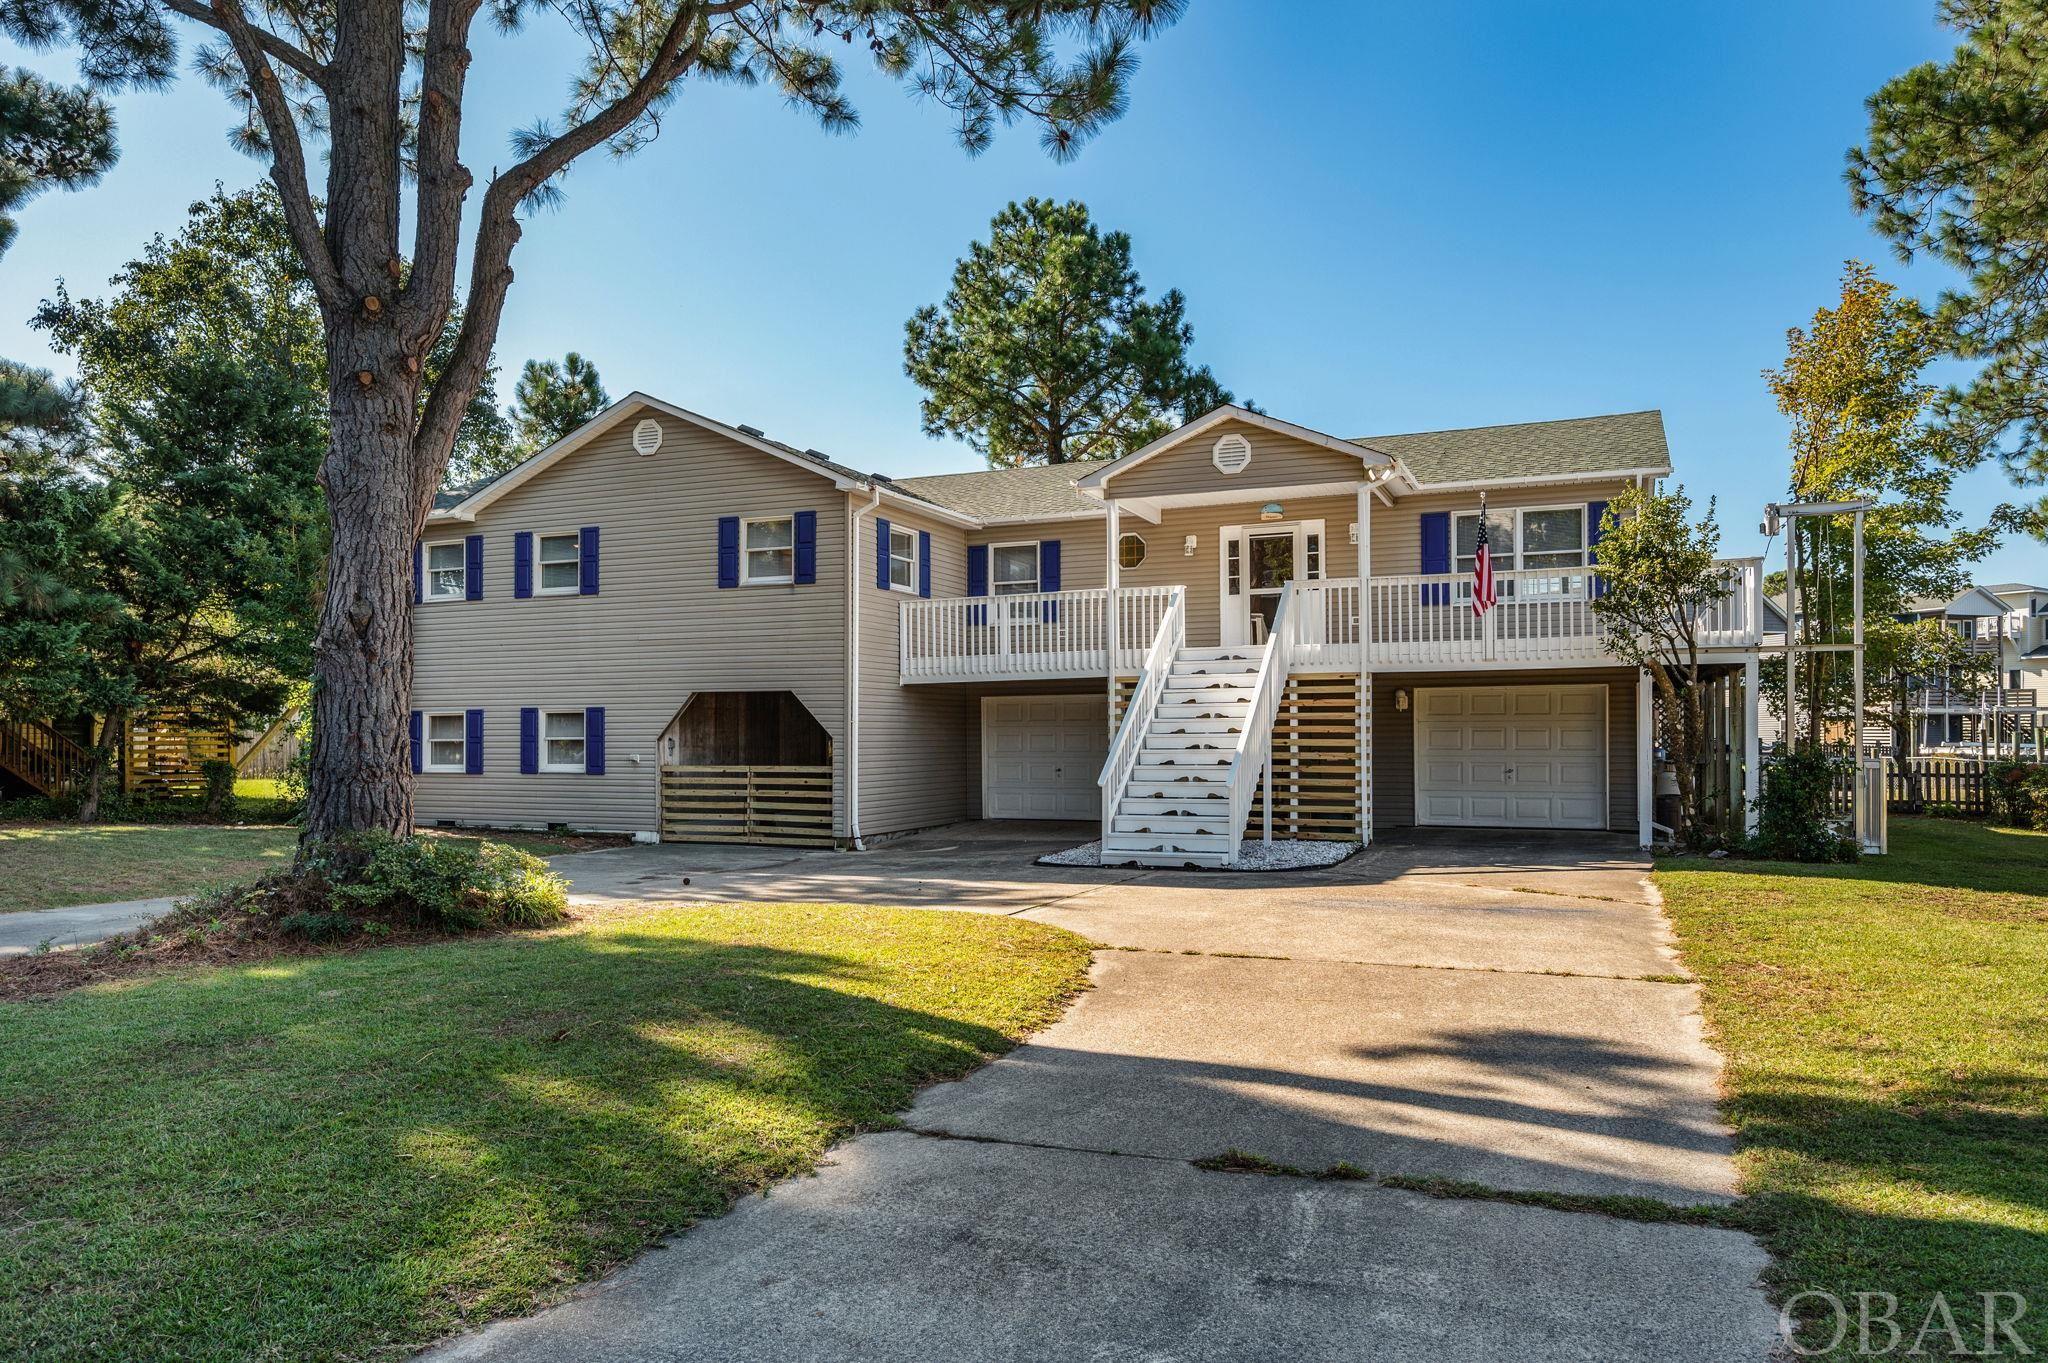 Wow, if you are looking for space this is the one for you!  As you walk in you are greeted with a wall of windows overlooking the canal and Albemarle sound.  The generous 23x23 living room with its cozy fireplace, beckons you to unwind while gazing at the serene waterfront setting. The kitchen has been thoughtfully designed as a place to gather and create culinary memories. The multiple decks and spacious screened in porch provide true year-round enjoyment. The bedrooms are roomy, 2 with en-suite baths. Two fully enclosed sunrooms can double as sleeping porches or offices, so the options are endless and there is plenty of room for everyone to spread out! The backyard invites you to enjoy outdoor gatherings at the waters edge and a tandem carport has room to store the boat. The extra space on the ground floor has endless possibilities! The original house size was doubled in 1995, utilizing the second lot. It has been lovingly maintained including new roof & septic in 2019. So many extras to enjoy also, including and external 1,000 lb cargo lift, EV charger, boat lift, and huge 3 bay garage/workshop along with multiple storage rooms & kayak racks. Listed square foot is for the 2nd floor finished space only.  Floor plans available in docs. This charming home is a rare gem, a perfect haven for those seeking both character and space in a Sound-front Community.  Pool, Yacht Club & Tennis are available for separate joining fee. Deep water navigable canals, summer sailing regattas, kayaking, crabbing, fishing and so much more to explore. Come see & enjoy!